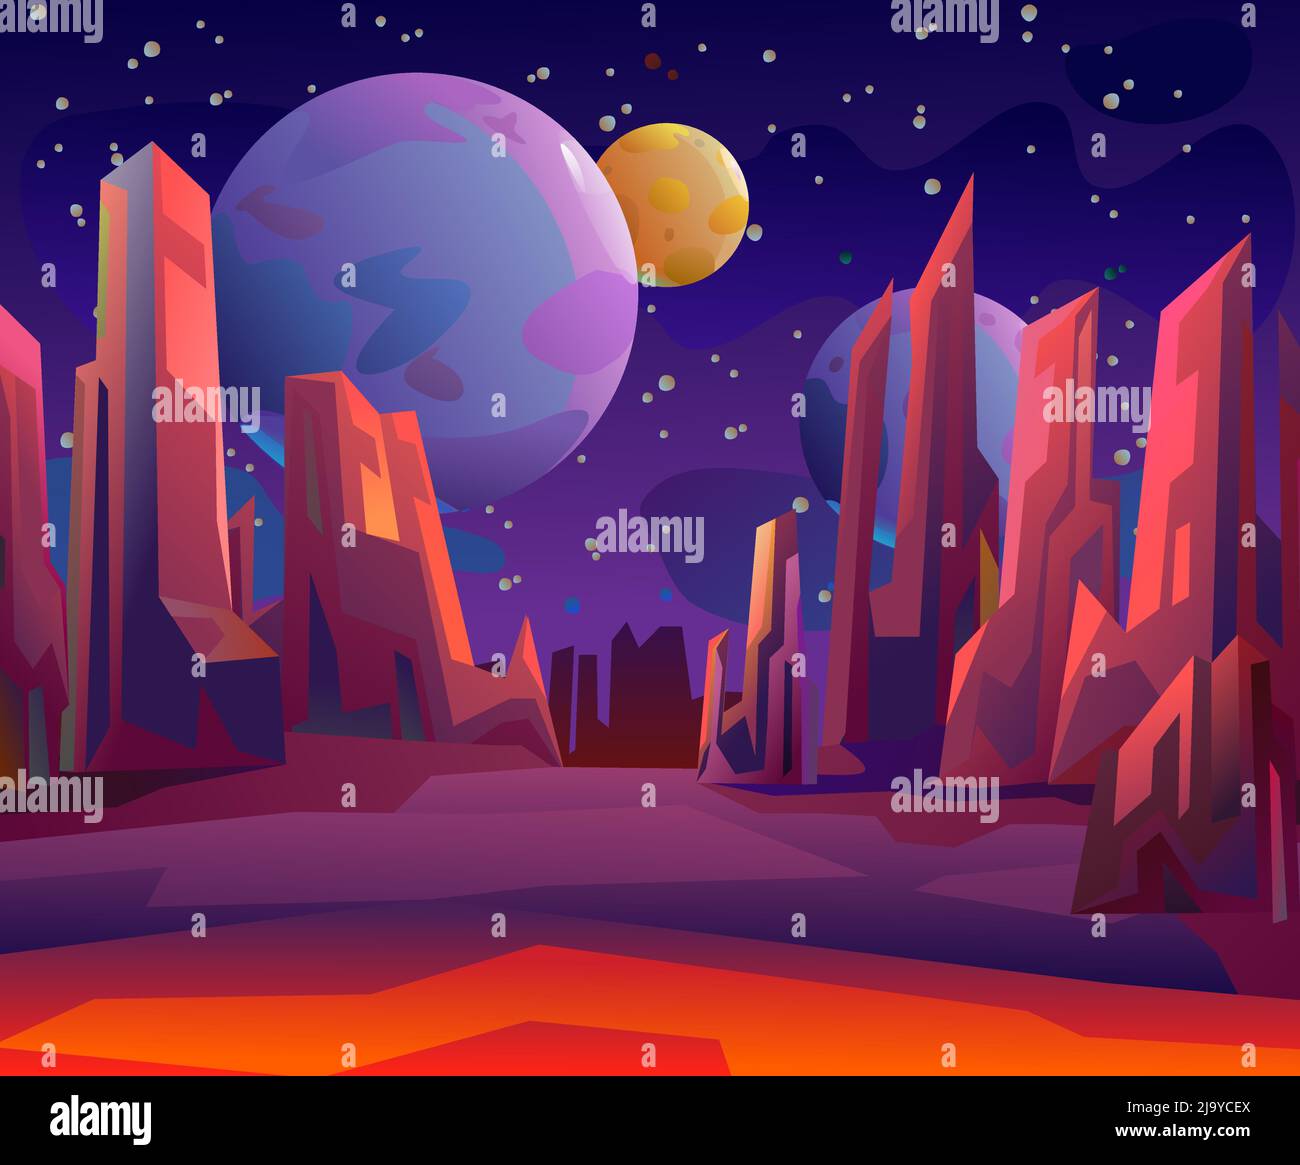 Rocky fantasy landscape. Satellite planets in space. Starry night sky. Beautiful stone scenery. Cartoon flat style design. Vector. Stock Vector